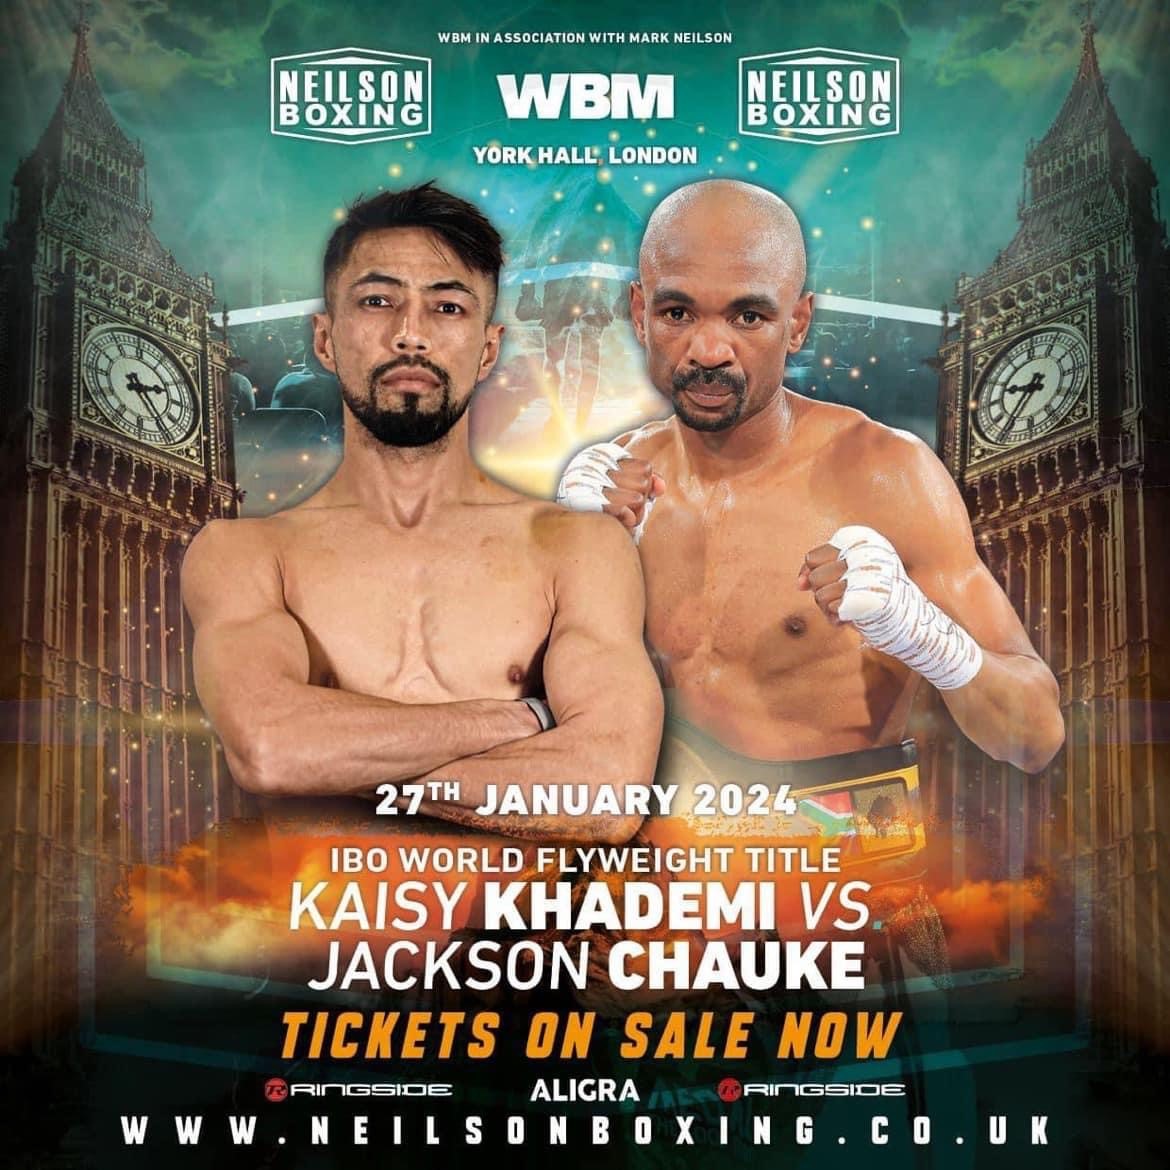 Kaisy Khademi defeated by Jackson Chauke in world title fight at the York Hall ibo boxrec flyweight title watch full fight highlights next youtube ko points ud afghan first uk scores results reports